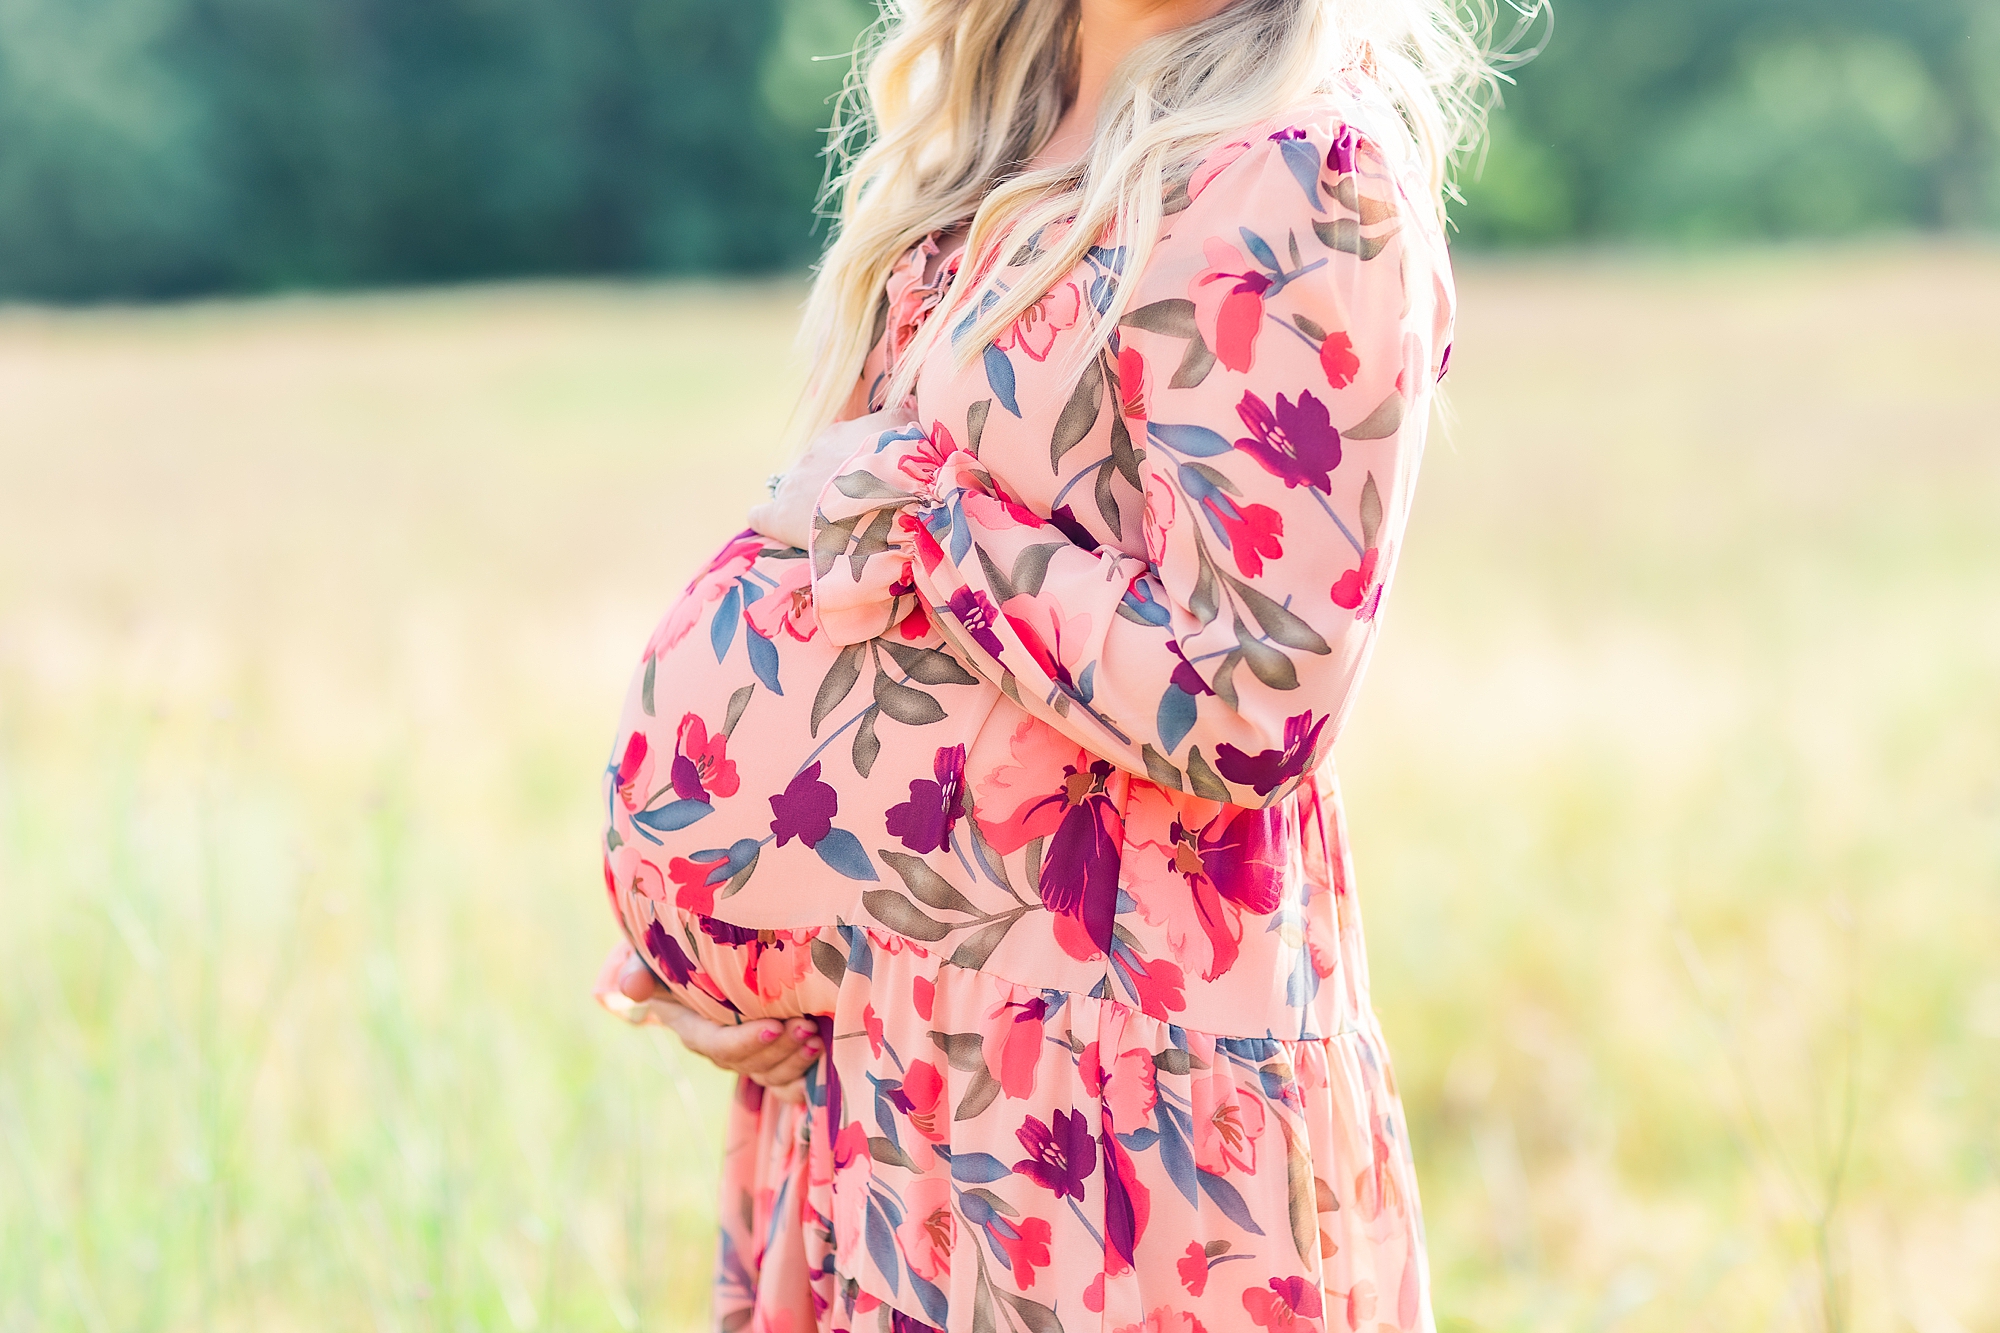 mom-to-be holds baby bump in pink floral dress